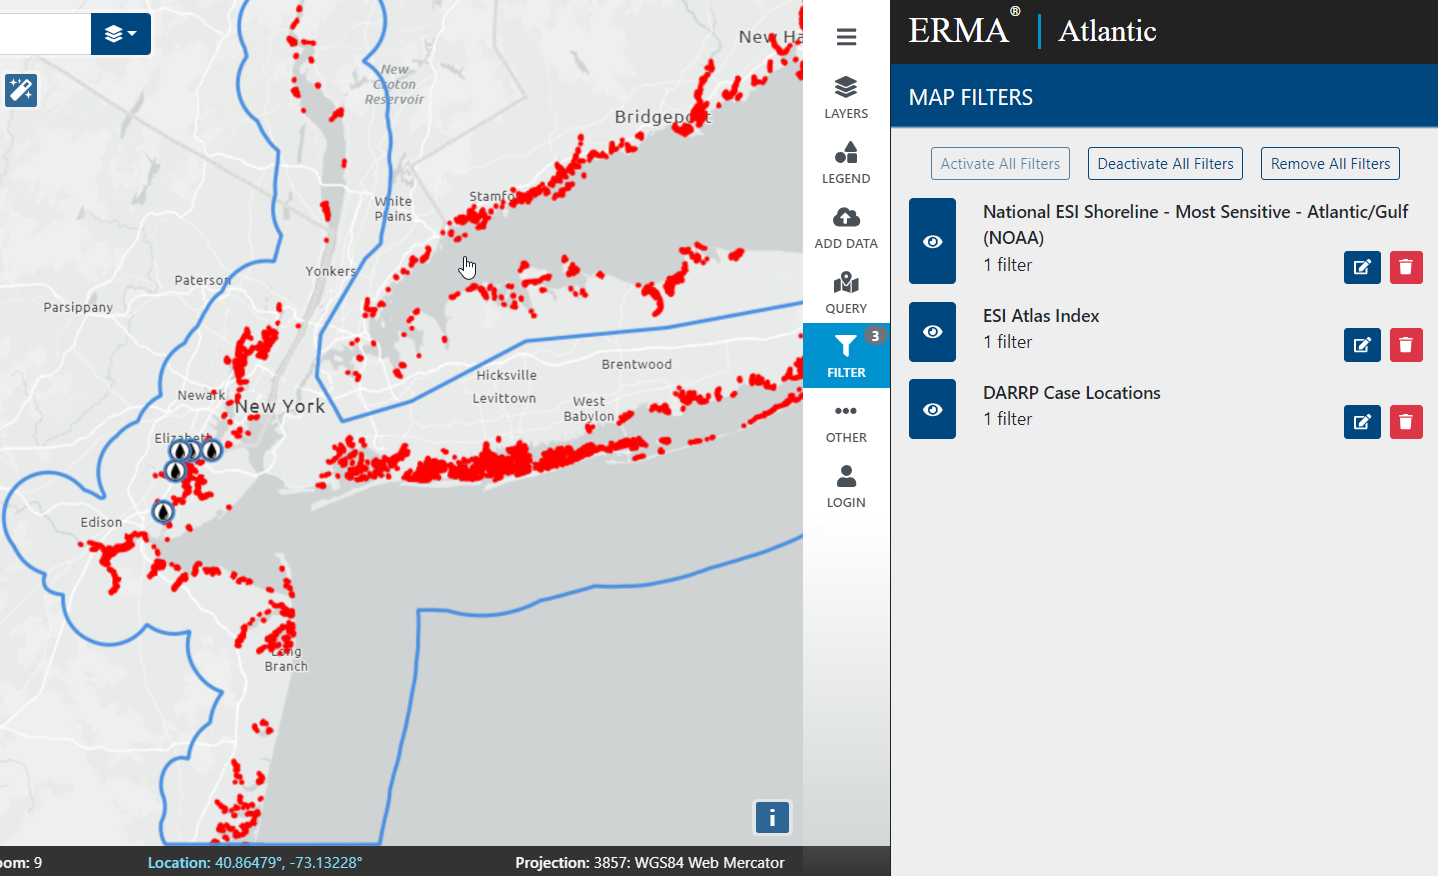 Enhanced map filtering feature showing map data applied in three different filters: National ESI Marsh Shoreline, ESI Atlas Index of New York/Long Island area, and oil spill cases in DARRP locations.